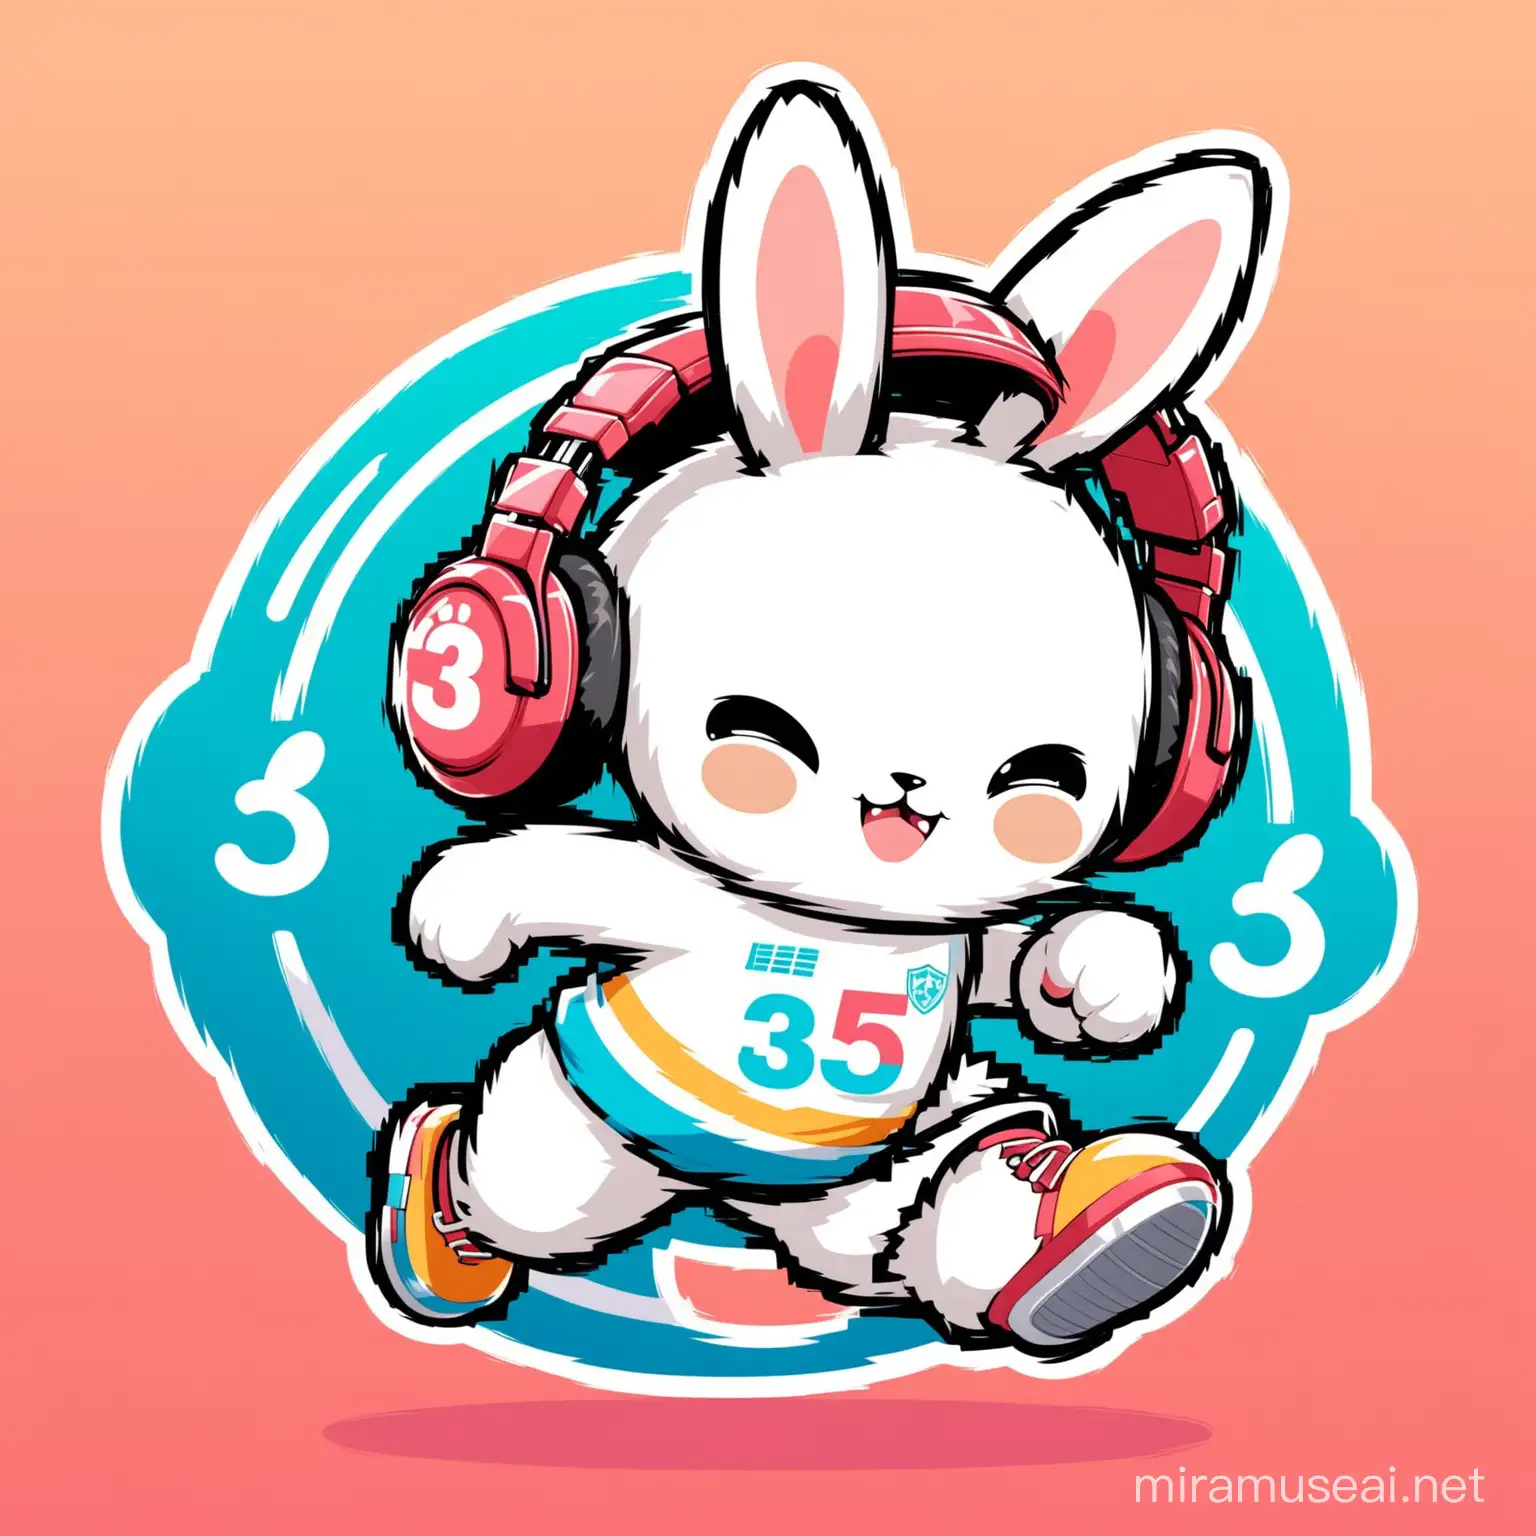 Dynamic Sports Mascot Bunny as a Motivational Broadcaster